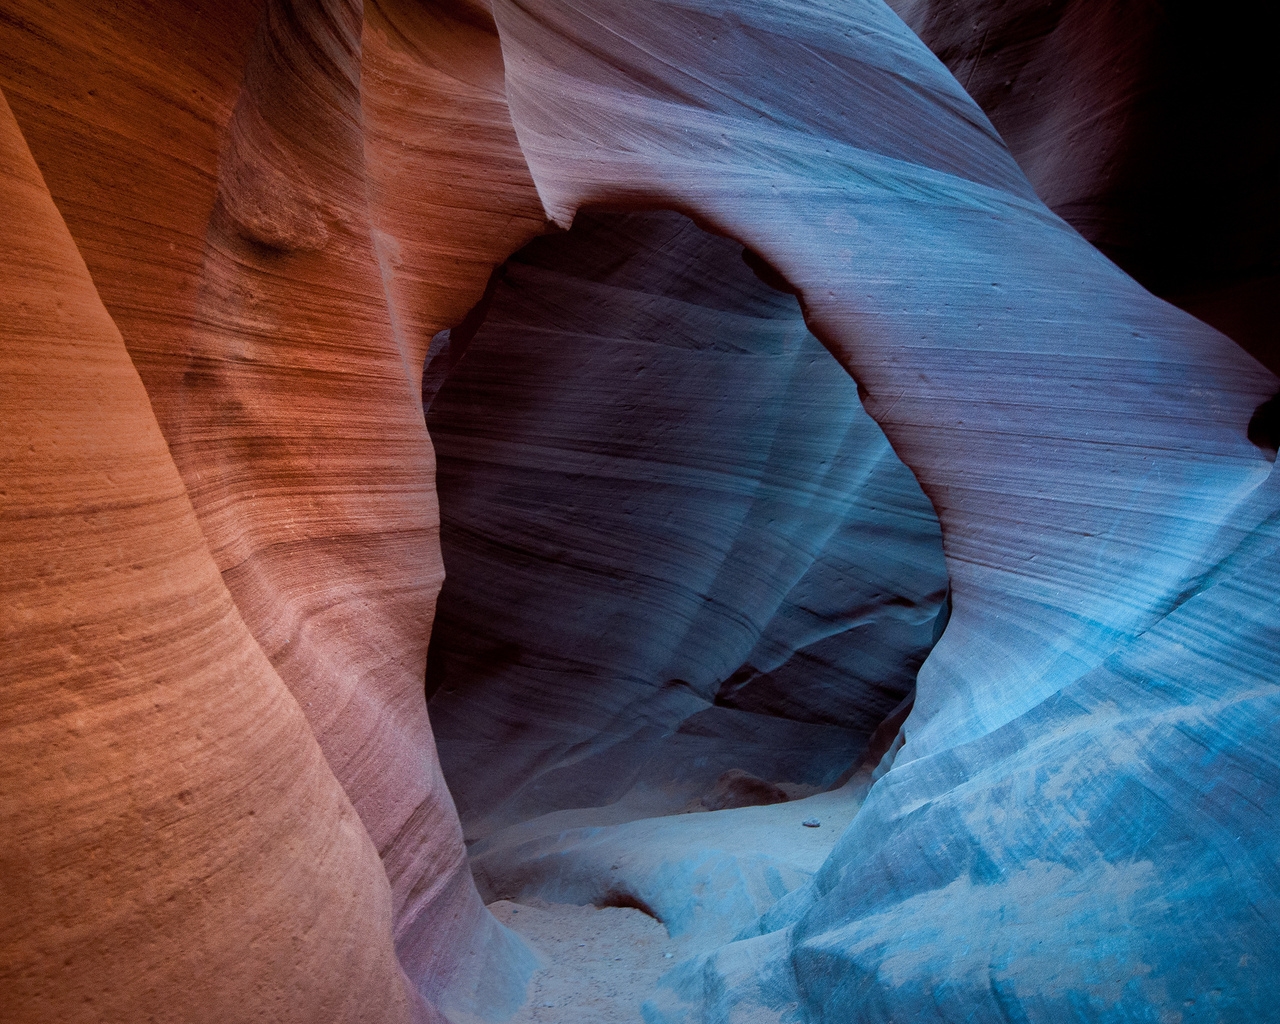 Antelope Canyon for 1280 x 1024 resolution